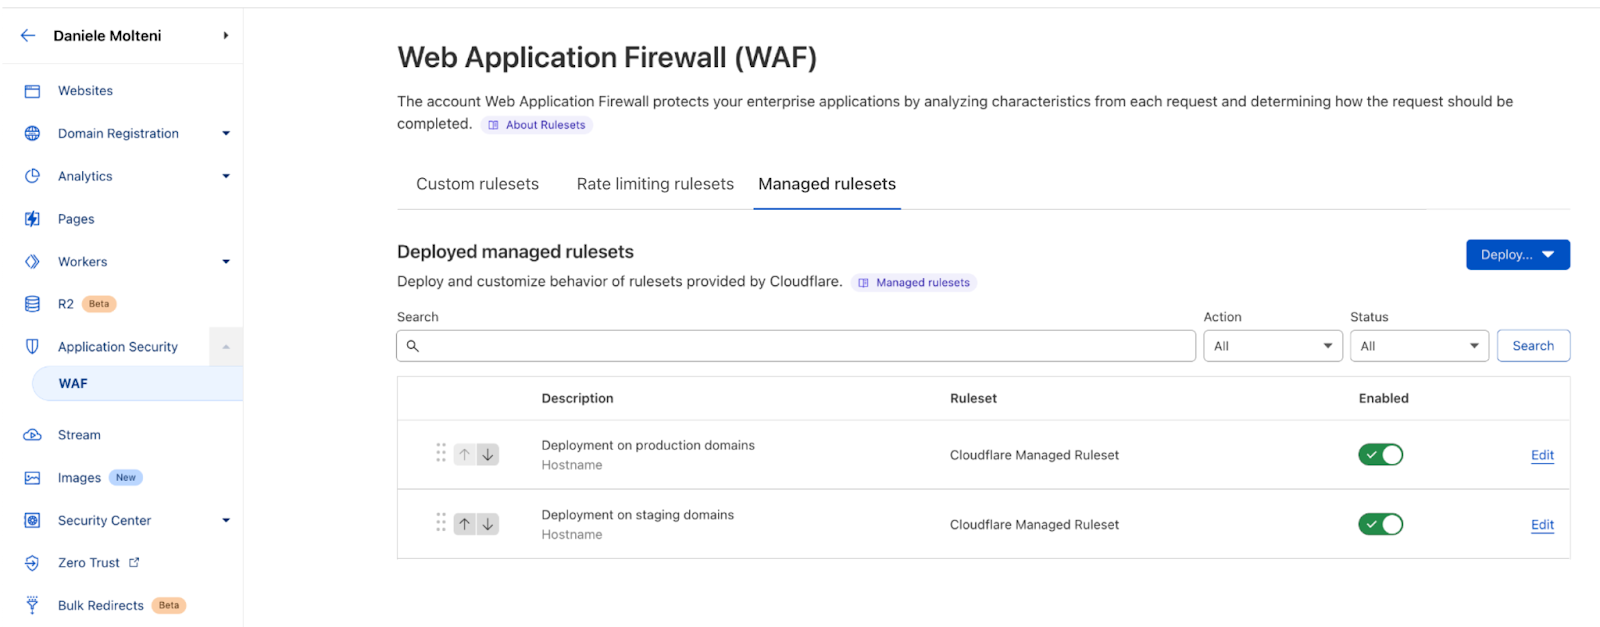 Account WAF now available to Enterprise customers